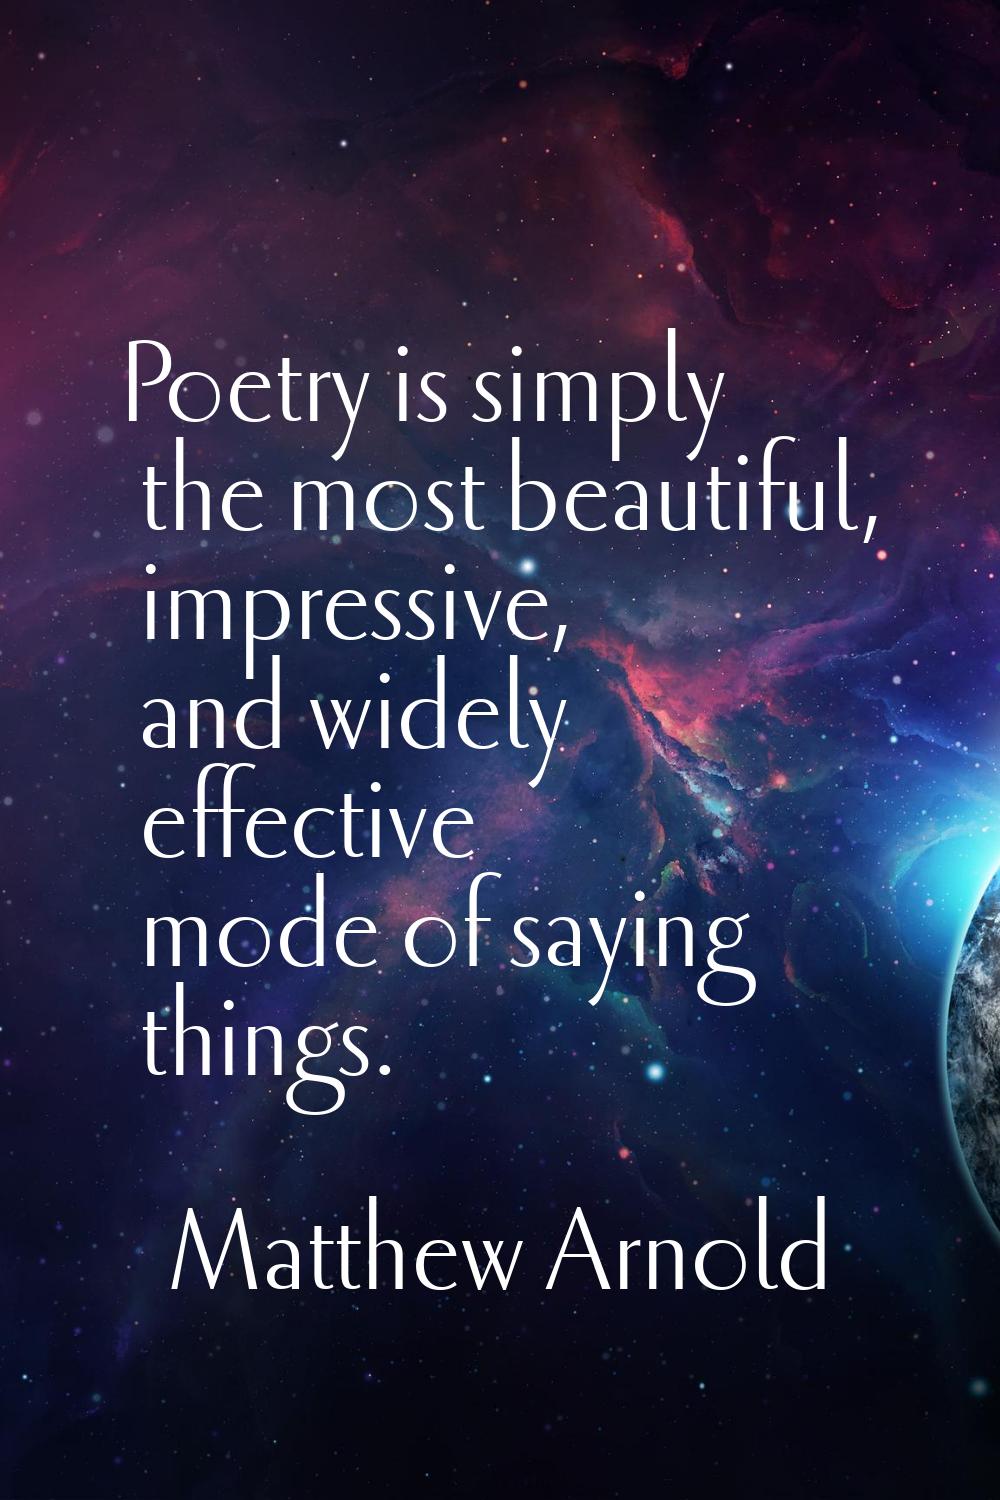 Poetry is simply the most beautiful, impressive, and widely effective mode of saying things.